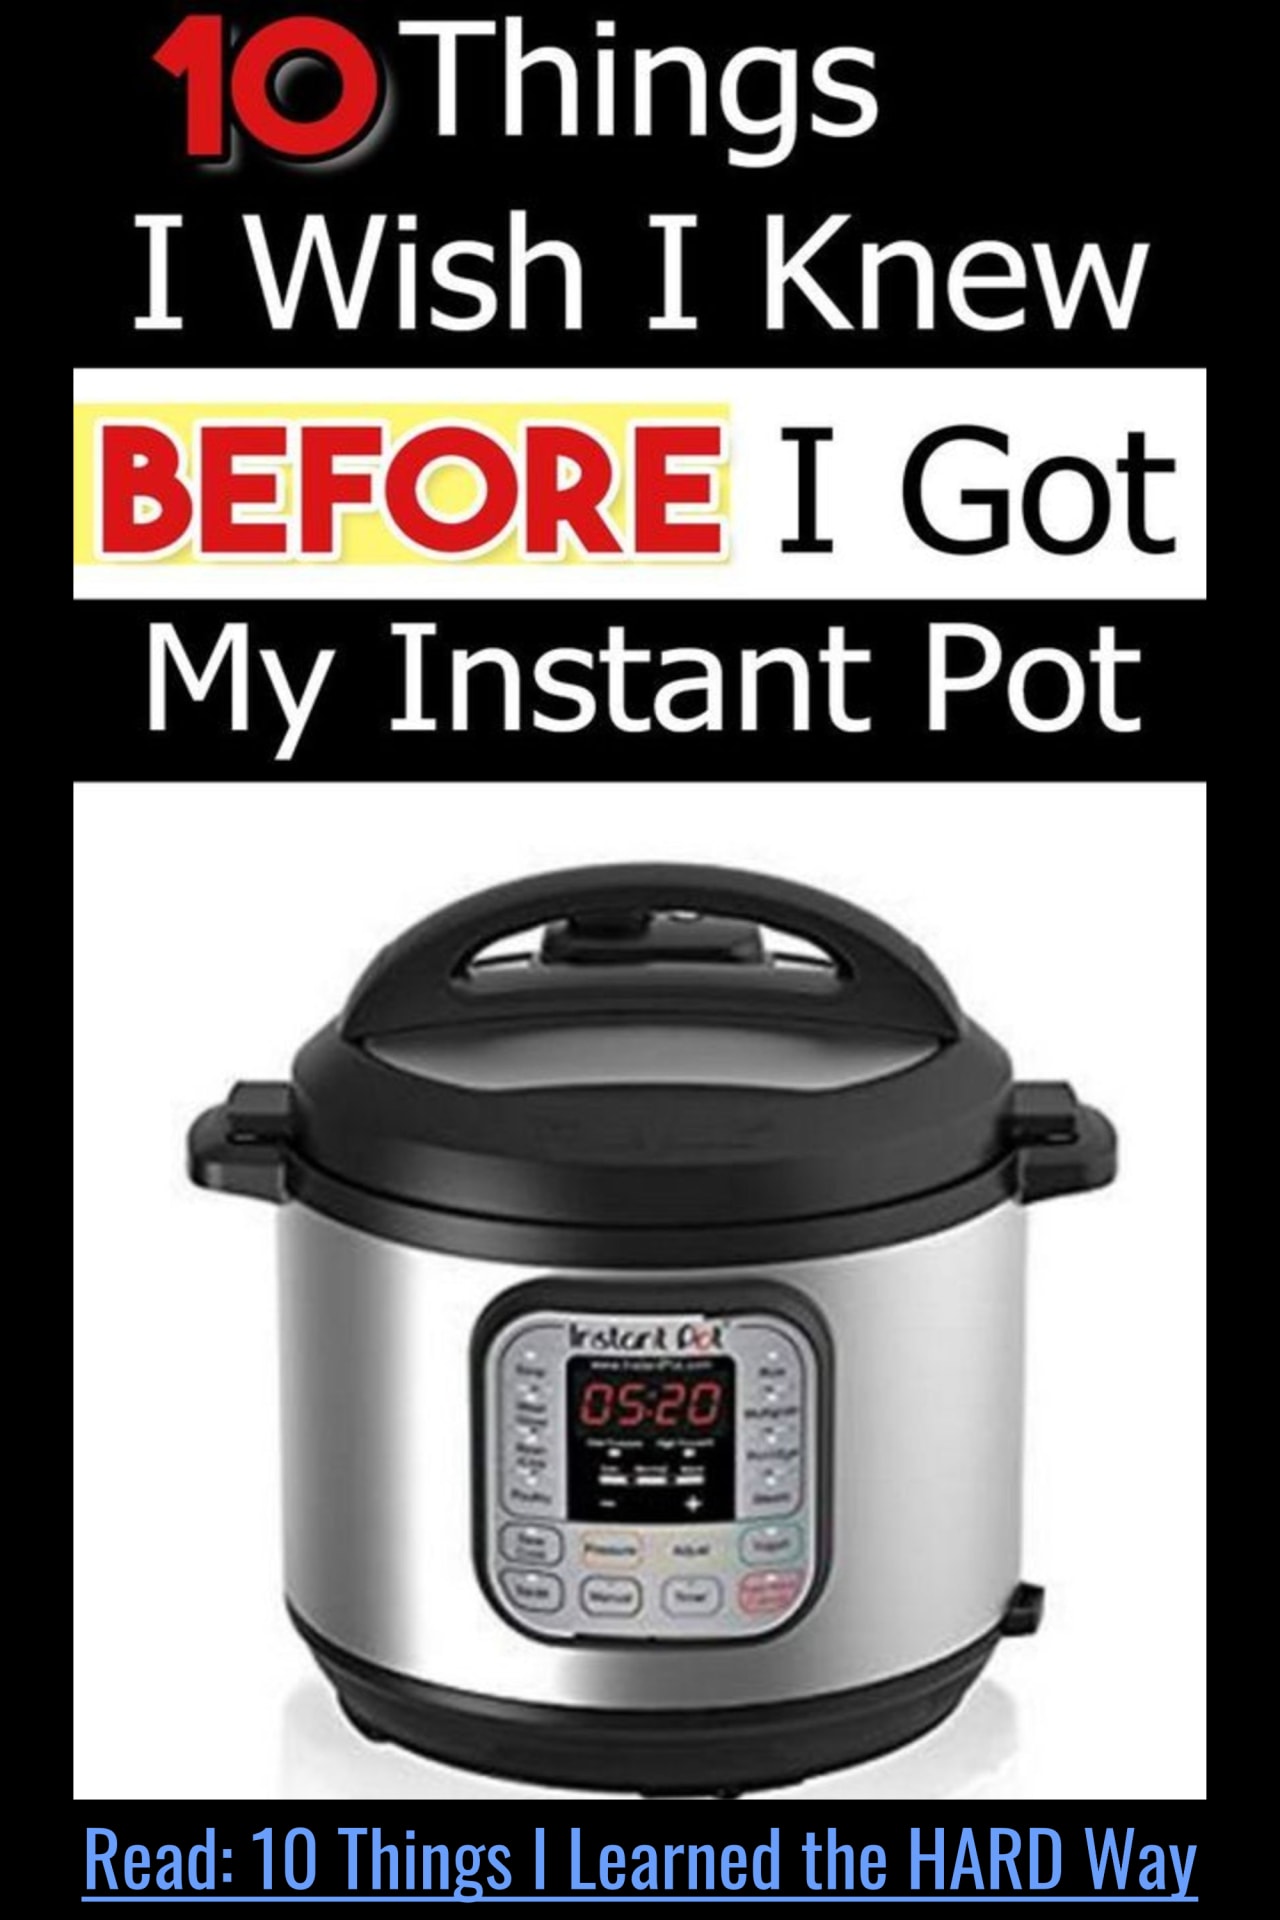 Instant Pot Tips for Beginners - These 10 Instant Pot Cooking Tips and Tricks Helped ALL my Instant Pot Recipes turn out better the easy way